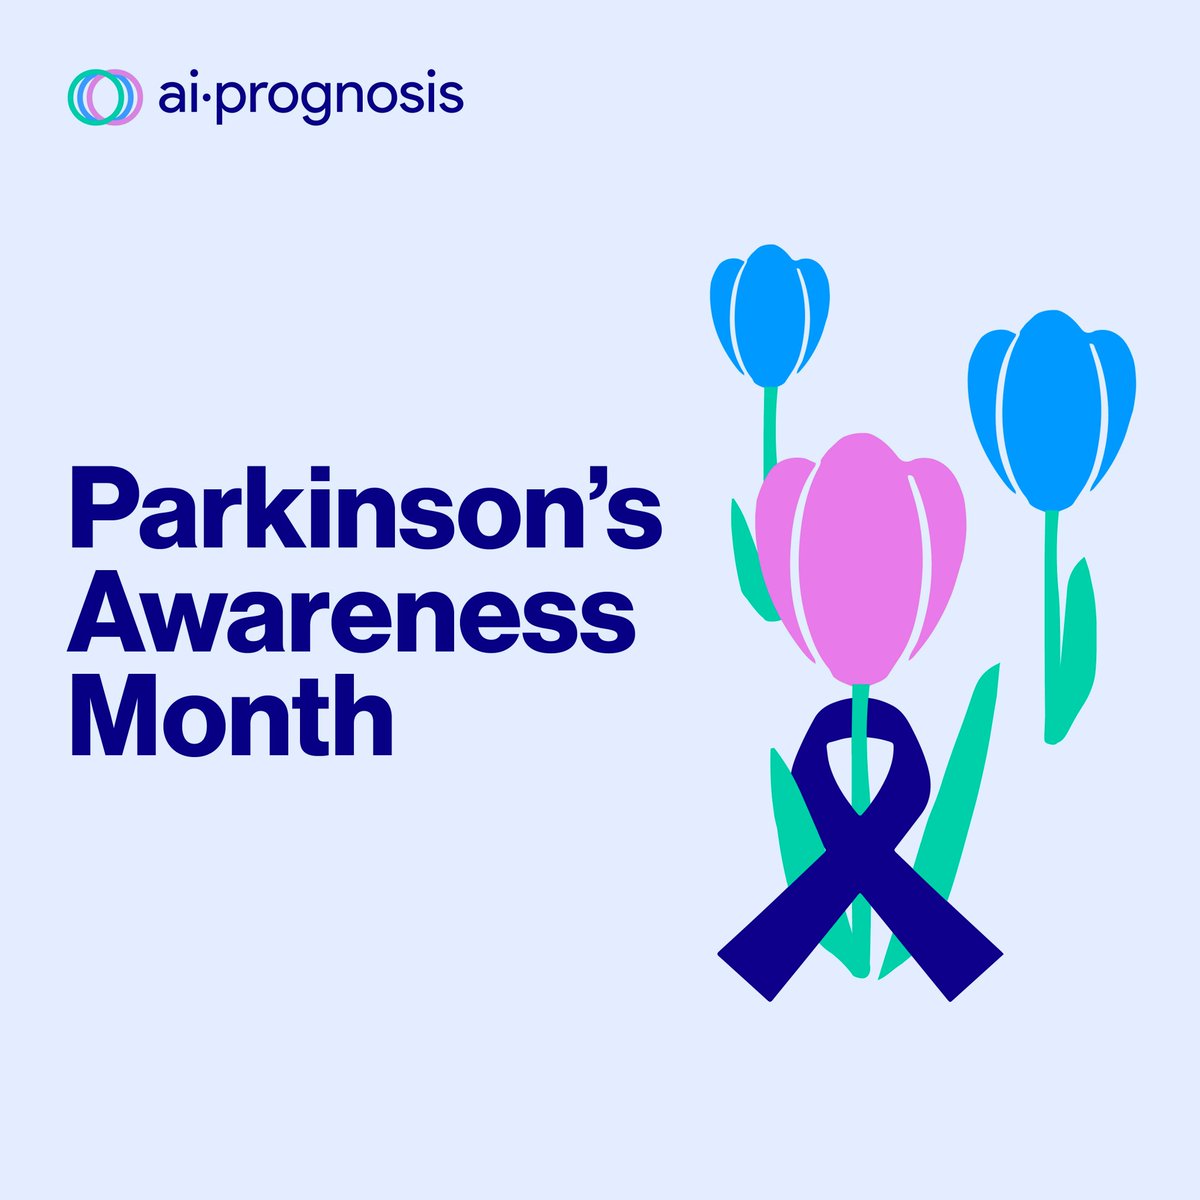 🌷 April is #ParkinsonsAwarenessMonth! Did you know #Parkinson’s affects 10M+ worldwide, expected to double by 2040? Early signs are often missed, and there's no cure. We can make a difference by coming together to raise awareness and supporting those living with #Parkinson's.